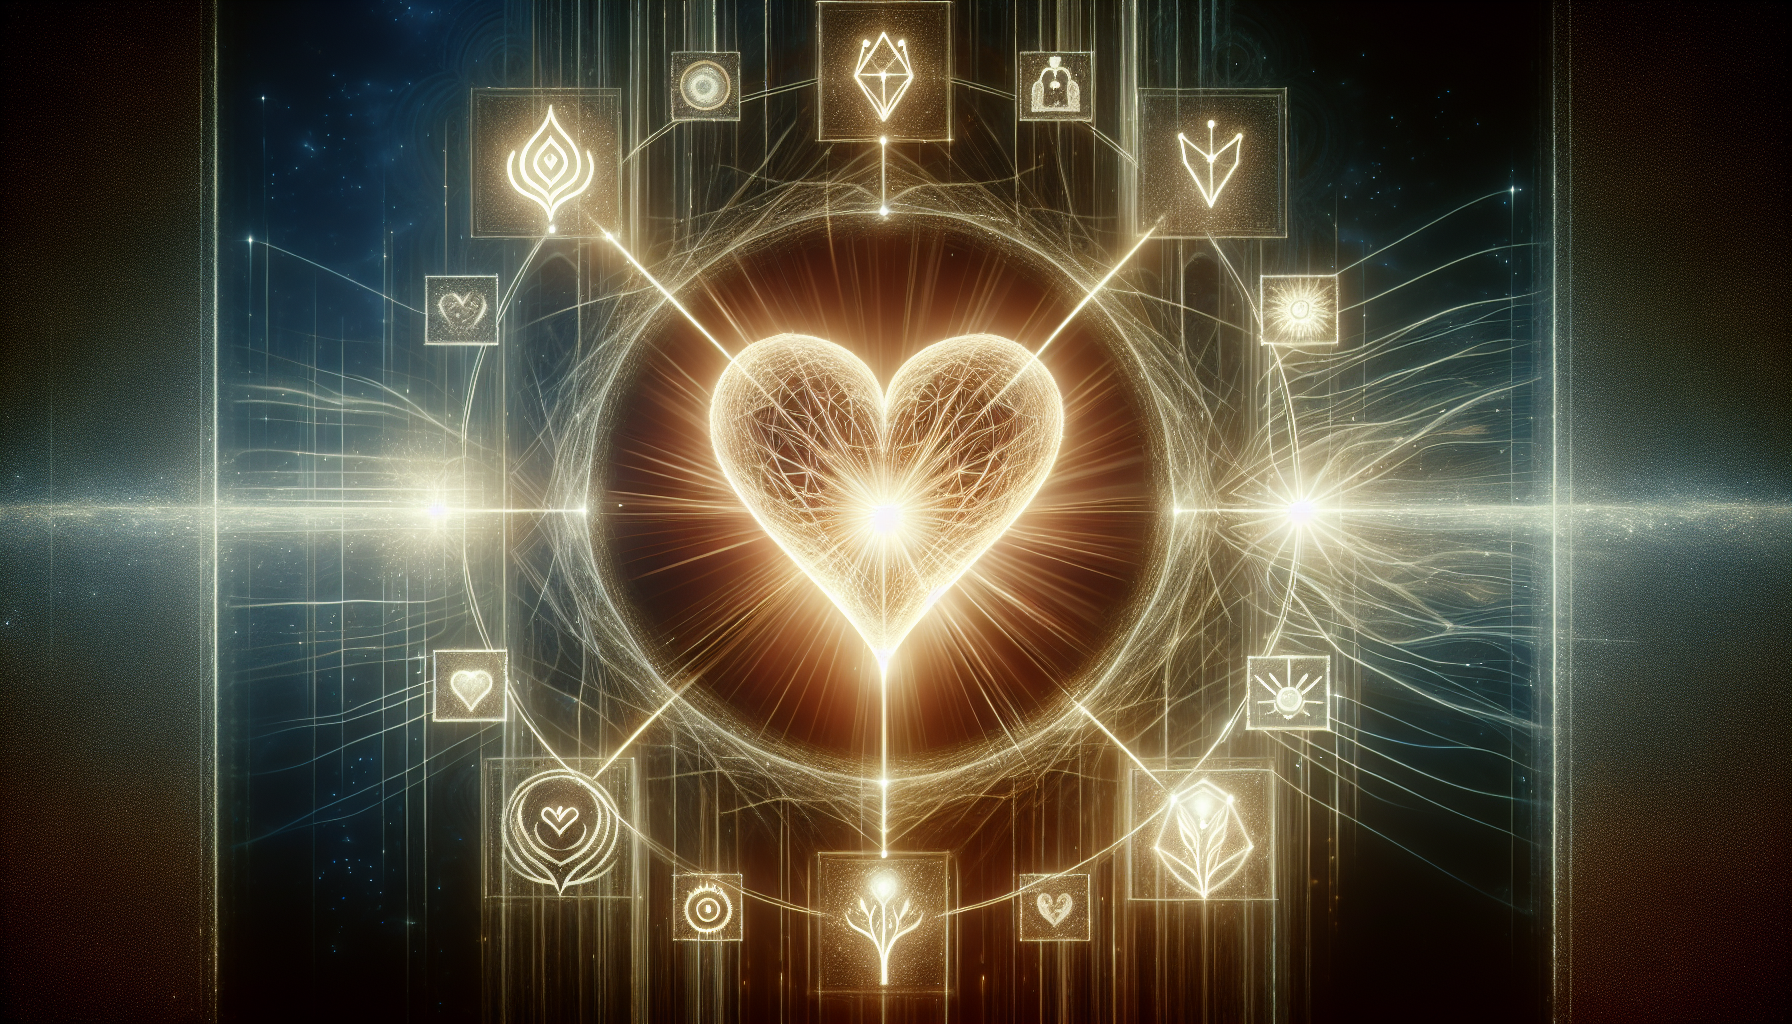 A visual representation of the concept of self-love and confidence being cultivated through the Law of Attraction. A glowing symbolic heart is in the center, radiating a warm, soft light. The heart is overcome by a sense of tranquility and acceptance. Surrounding the heart, faint symbols and icons relating to confidence such as a crown, lion, and a tall mountain are subtly apparent. In the background, the subtle image of an invisible magnet pulling positive energy symbols towards the heart, representing the Law of Attraction, emanates a gentle, inviting glow.